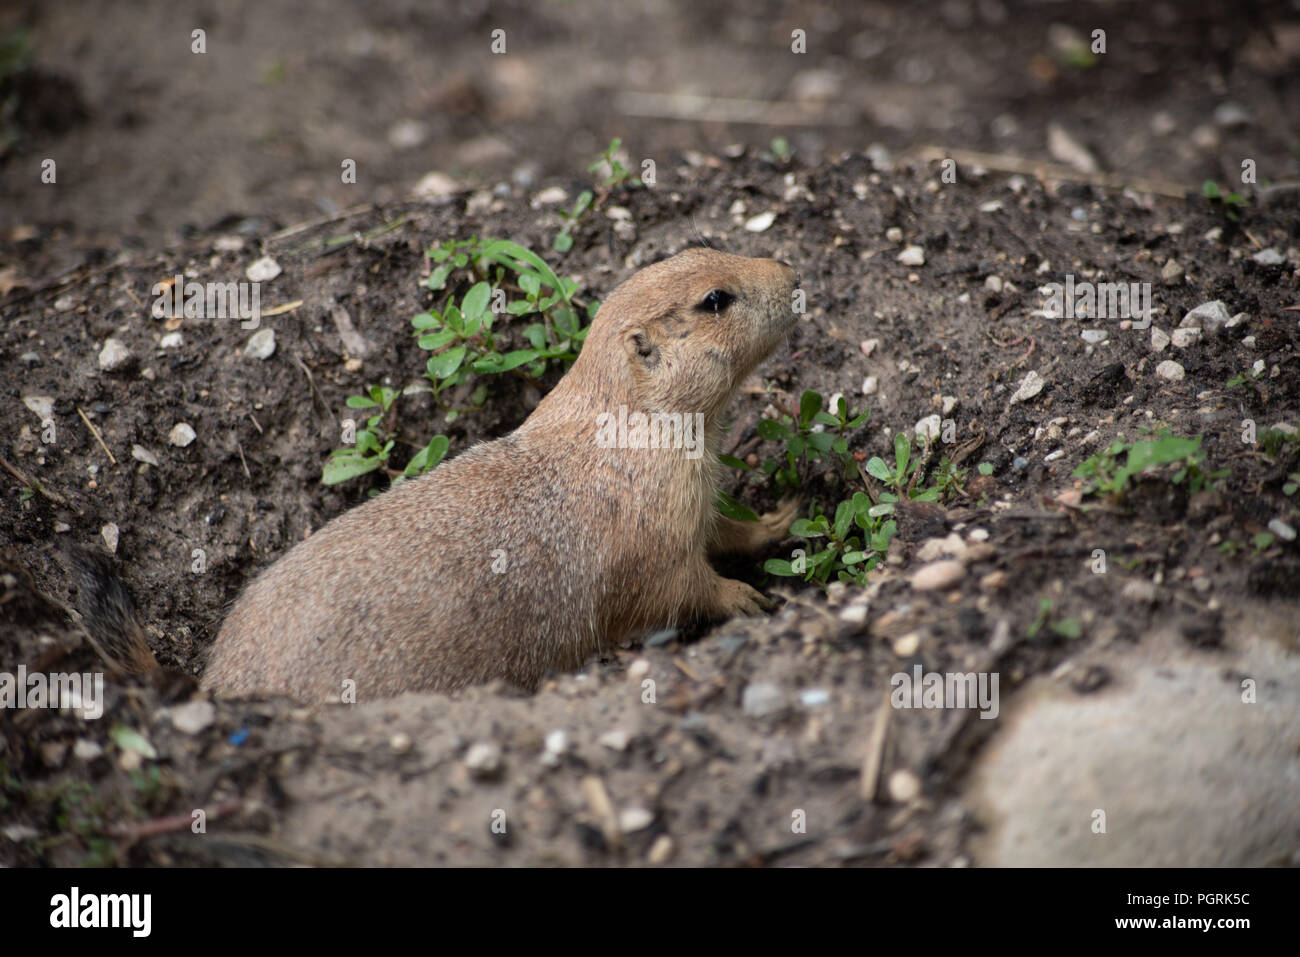 Prairie dogs are a genus of mammals belonging to the Rodent order and to the Sciuridae family, widespread in the American prairies. Despite the name, Stock Photo